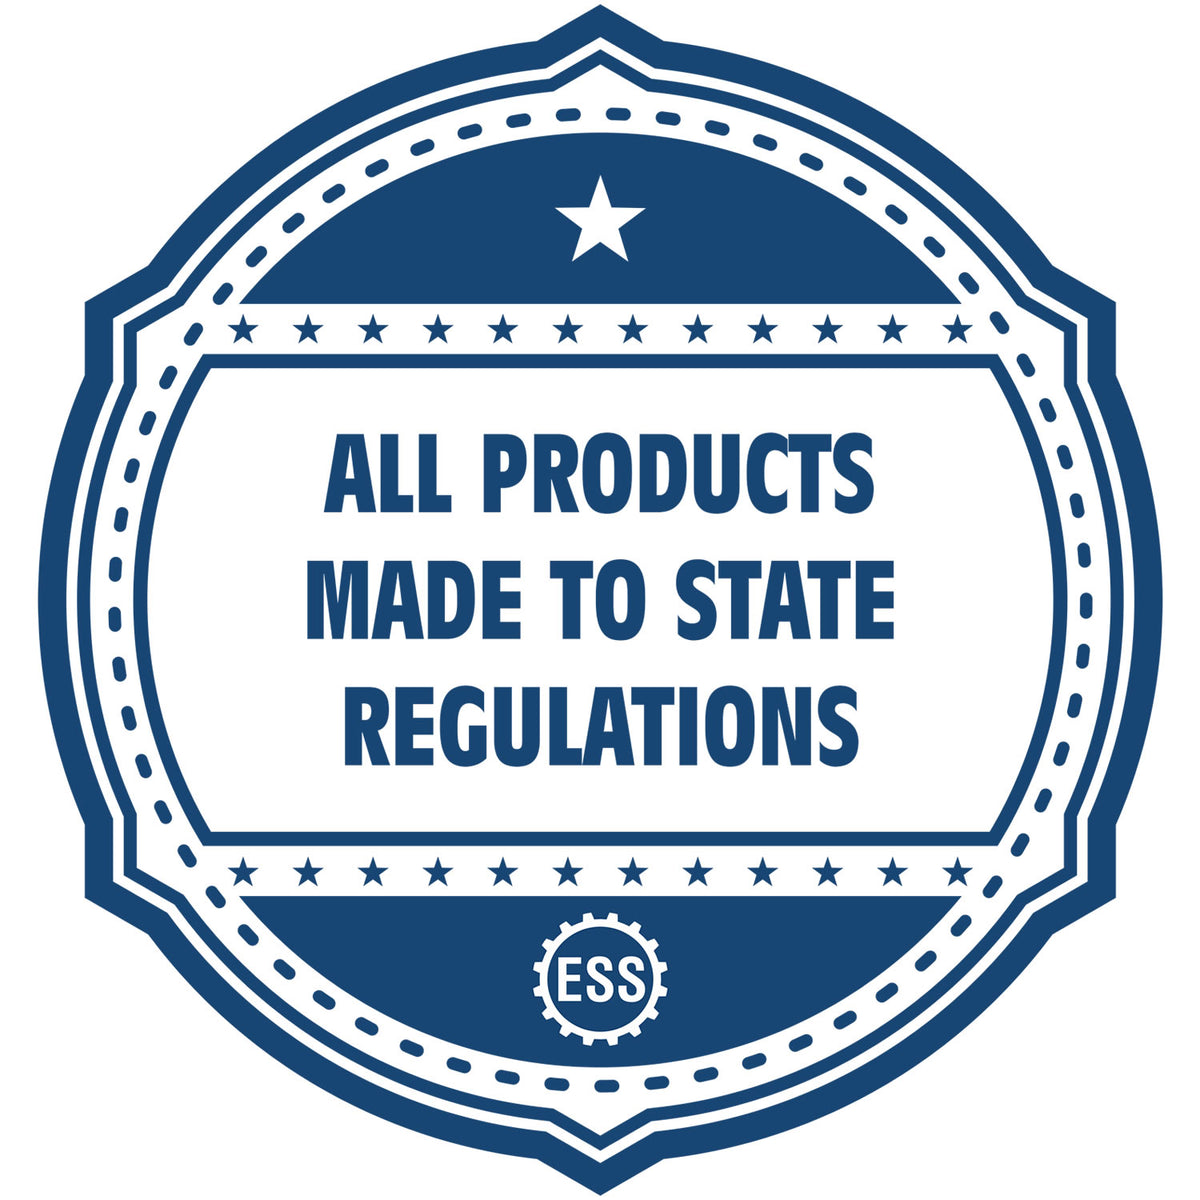 A blue icon or badge for the Self-Inking Montana Geologist Stamp showing that this product is made in compliance with state regulations.